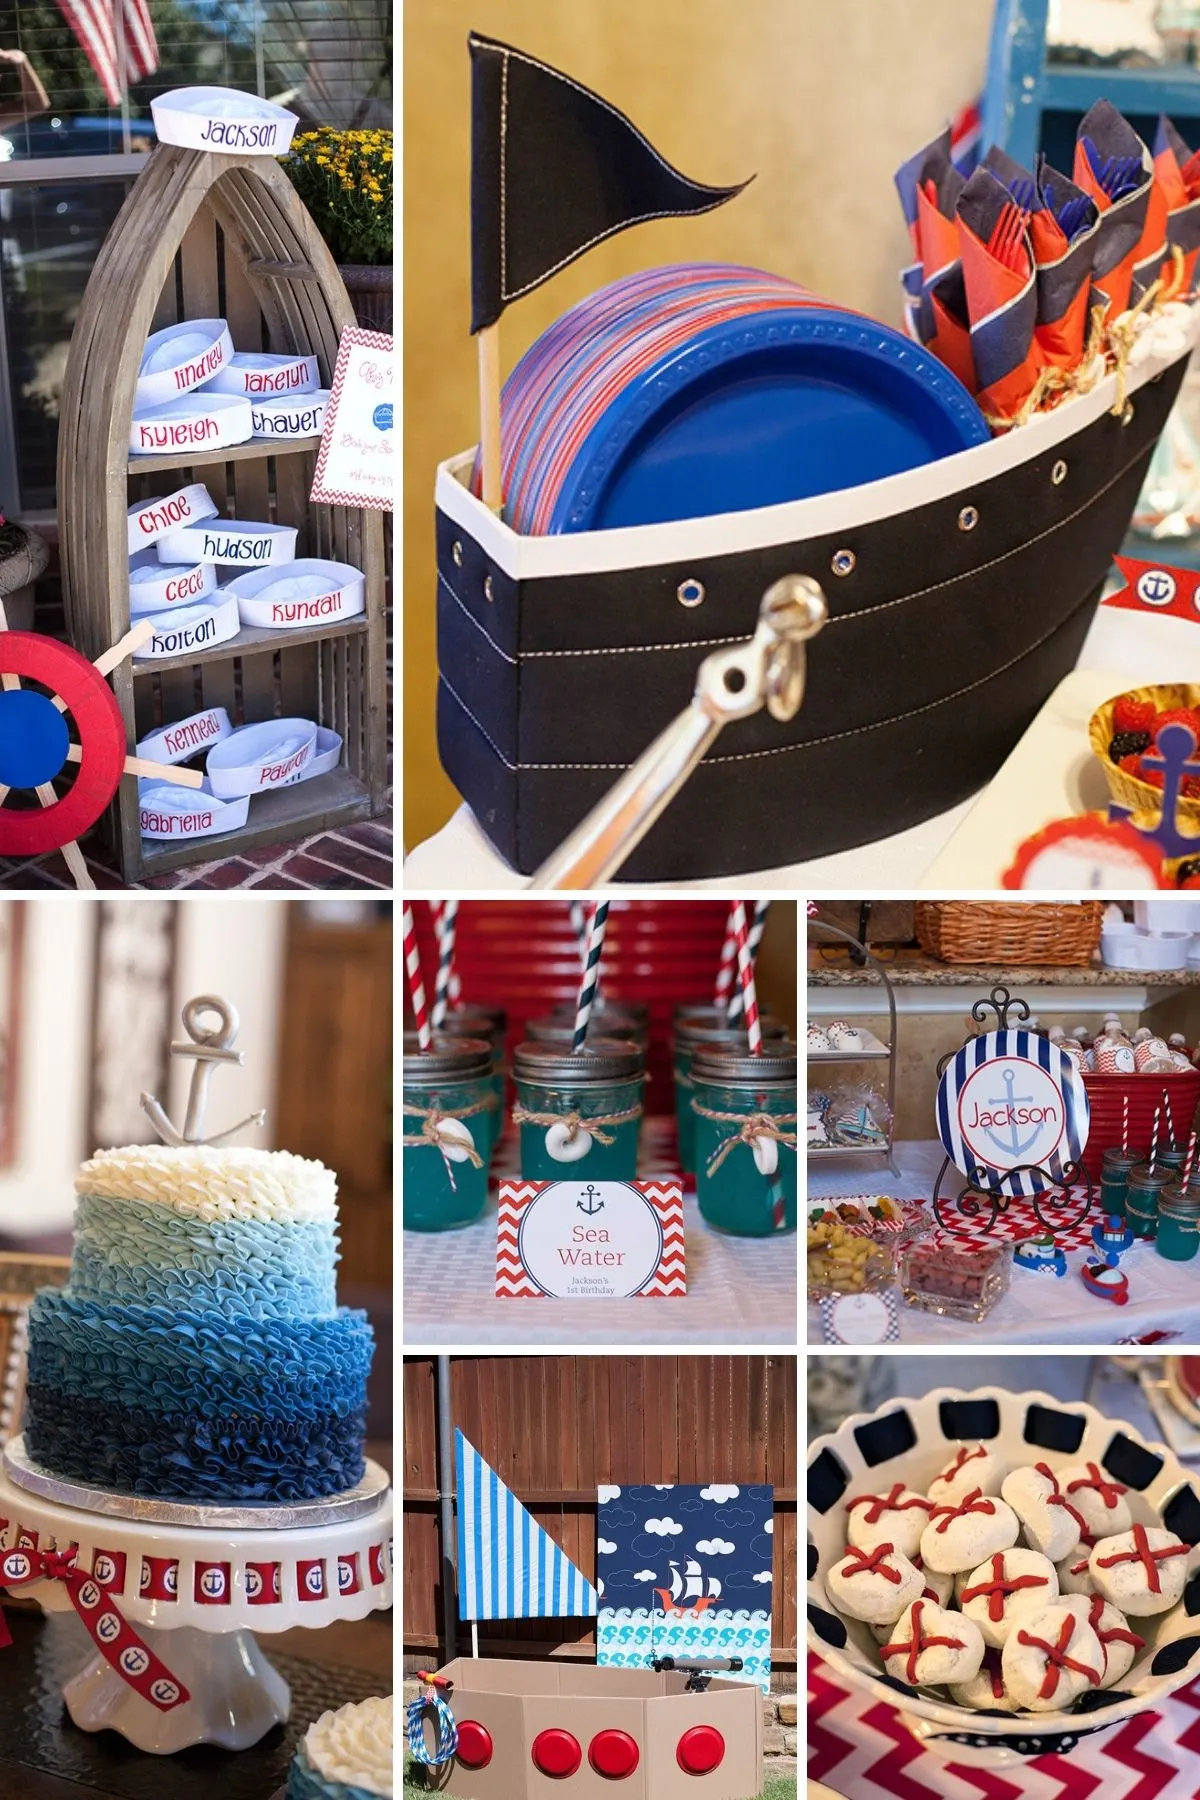 Photo collage for nautical party theme including cakes, ship decorations, and party favors.